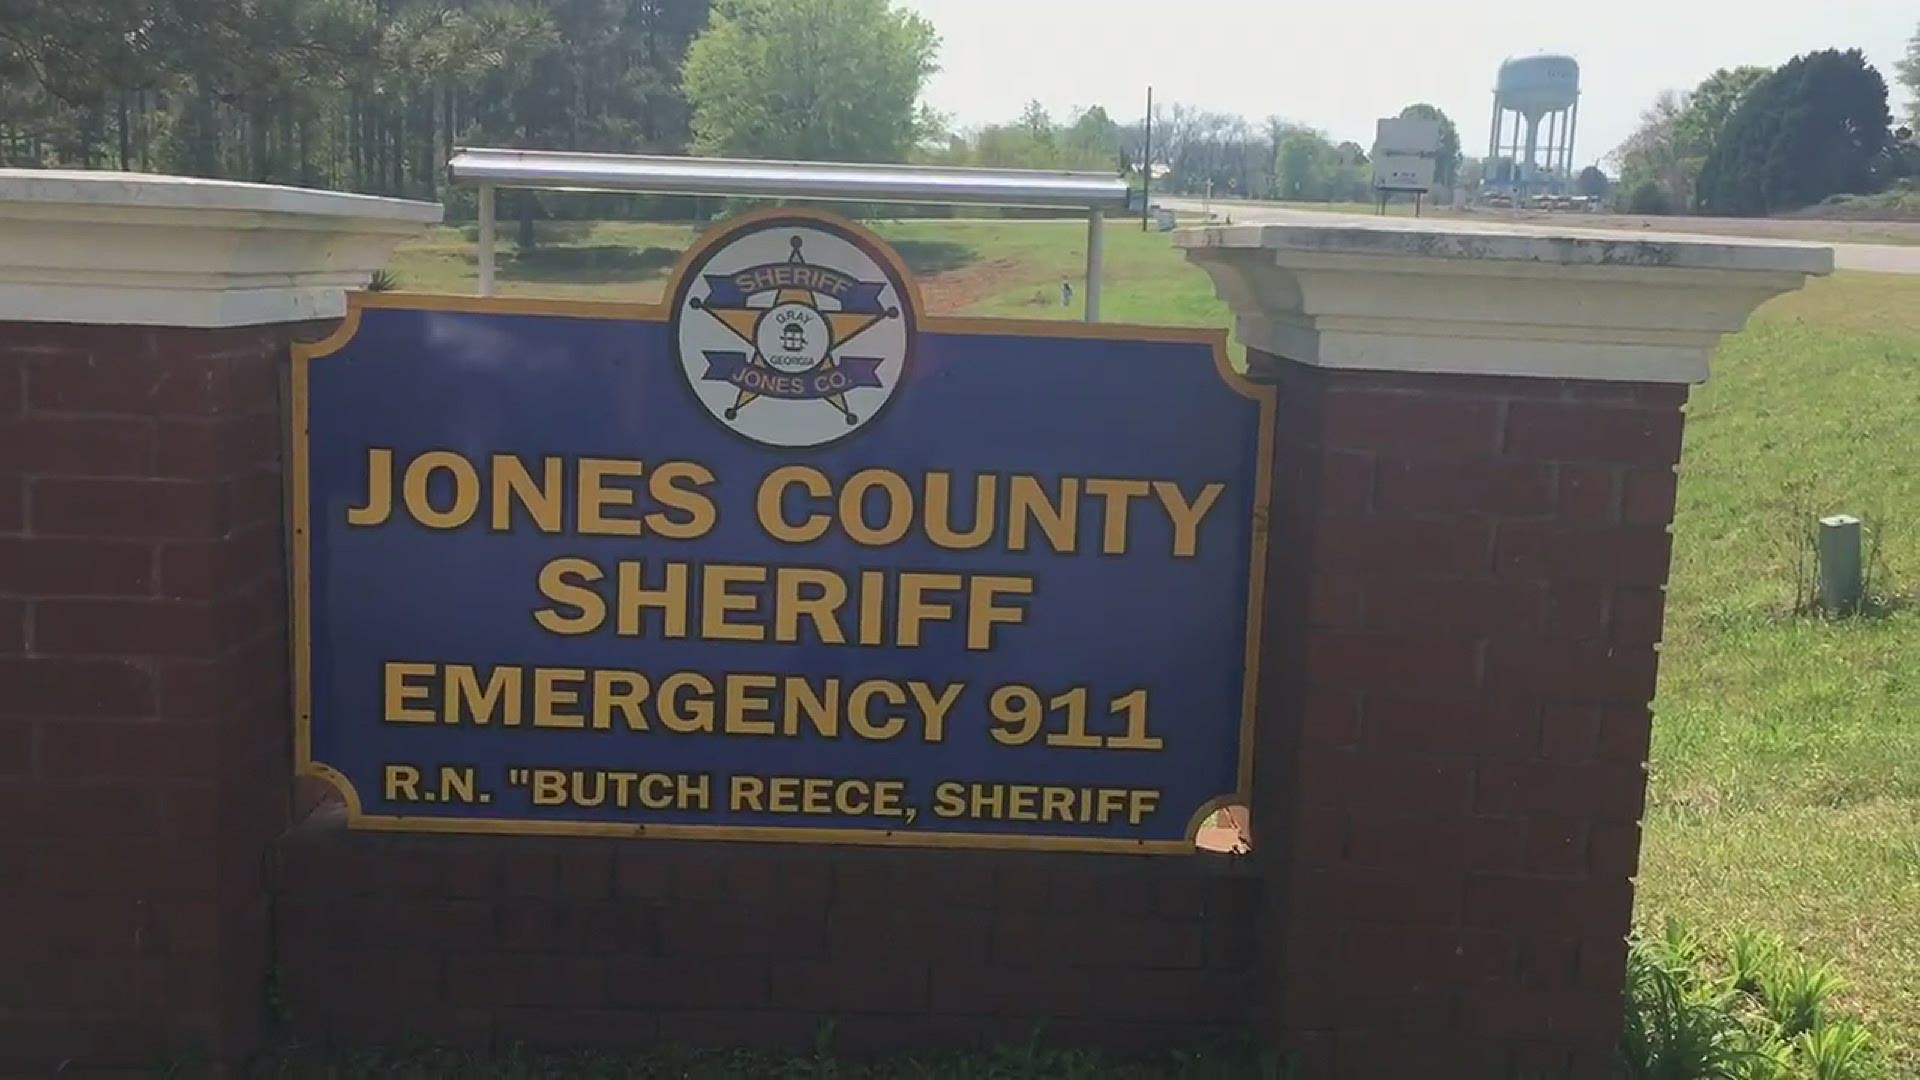 Investigators say Operation Lone Ranger started in June 2019 when they began looking into the sale of narcotics in Jones County
Credit: Bernie